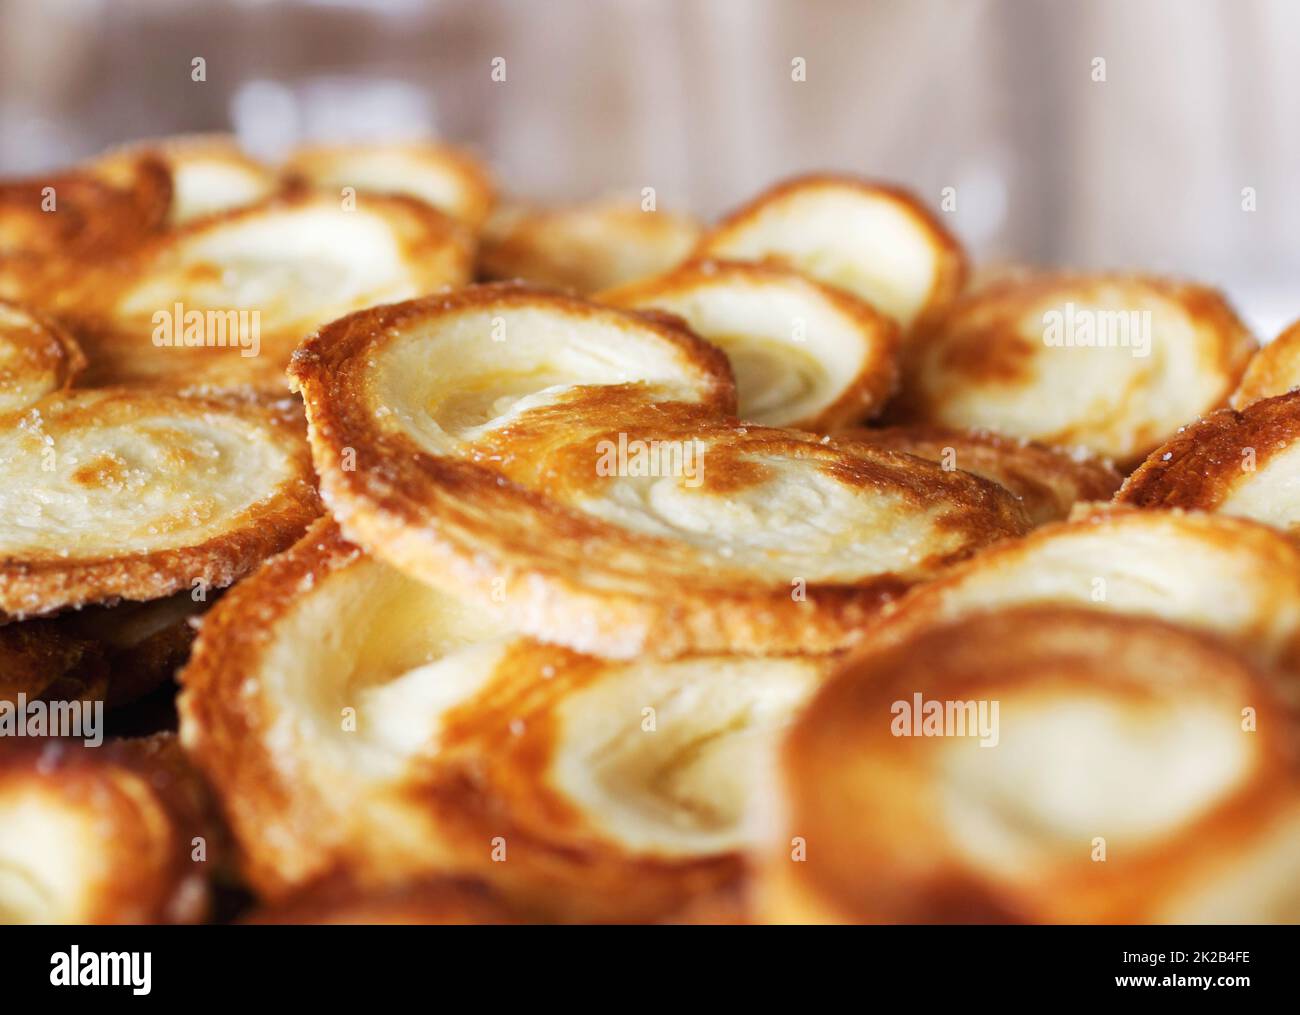 Fresh and tasty. Cropped shot of a tray of baked goods. Stock Photo